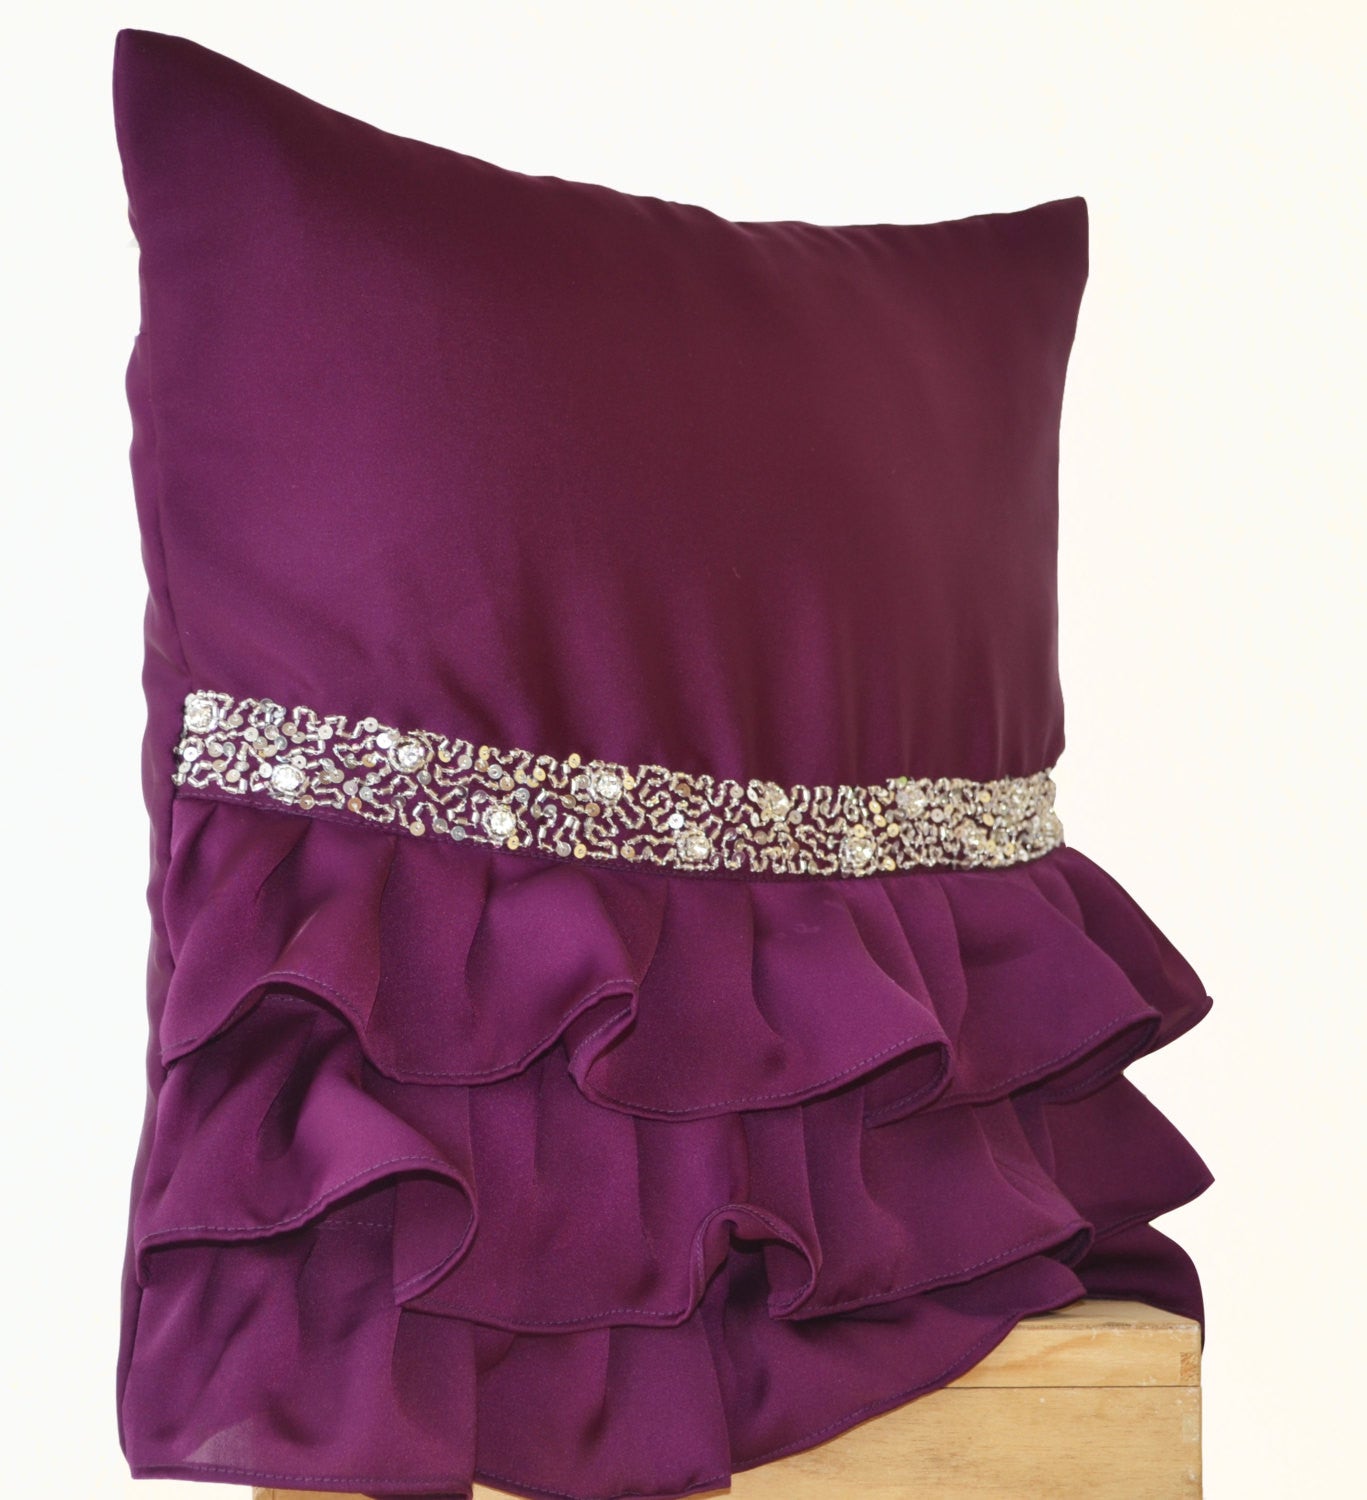 Handmade purple throw pillow with sequin and ruffles